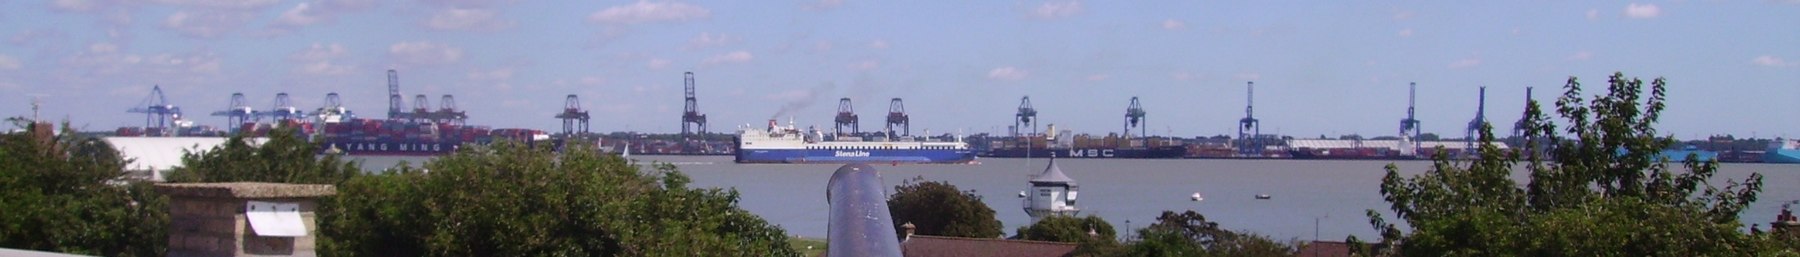 Harwich banner view from Redout emplacement.JPG